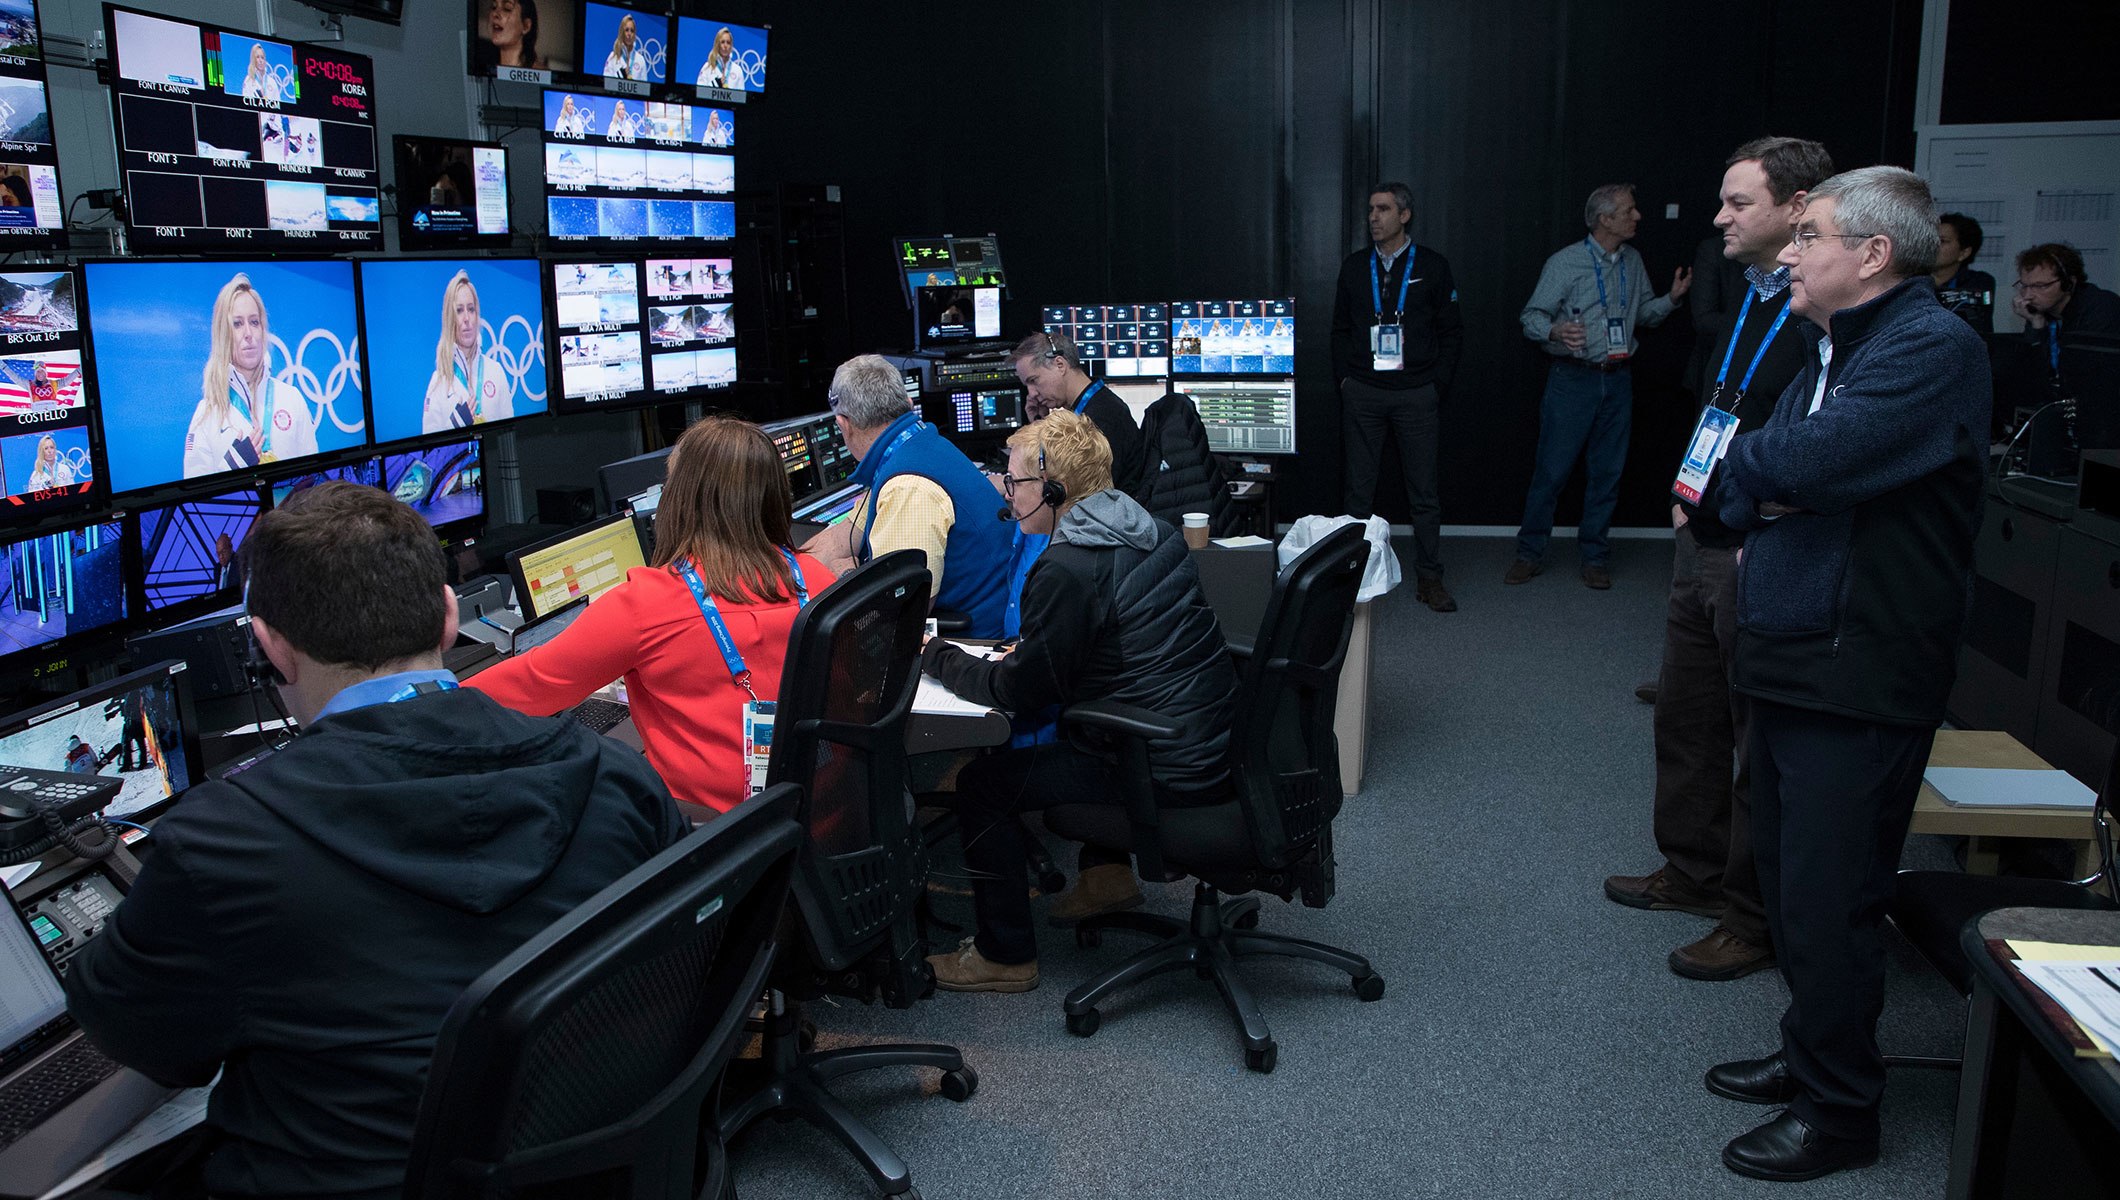 BEHIND-THE-SCENES LOOK AT THE WORLD OF OLYMPIC BROADCASTING